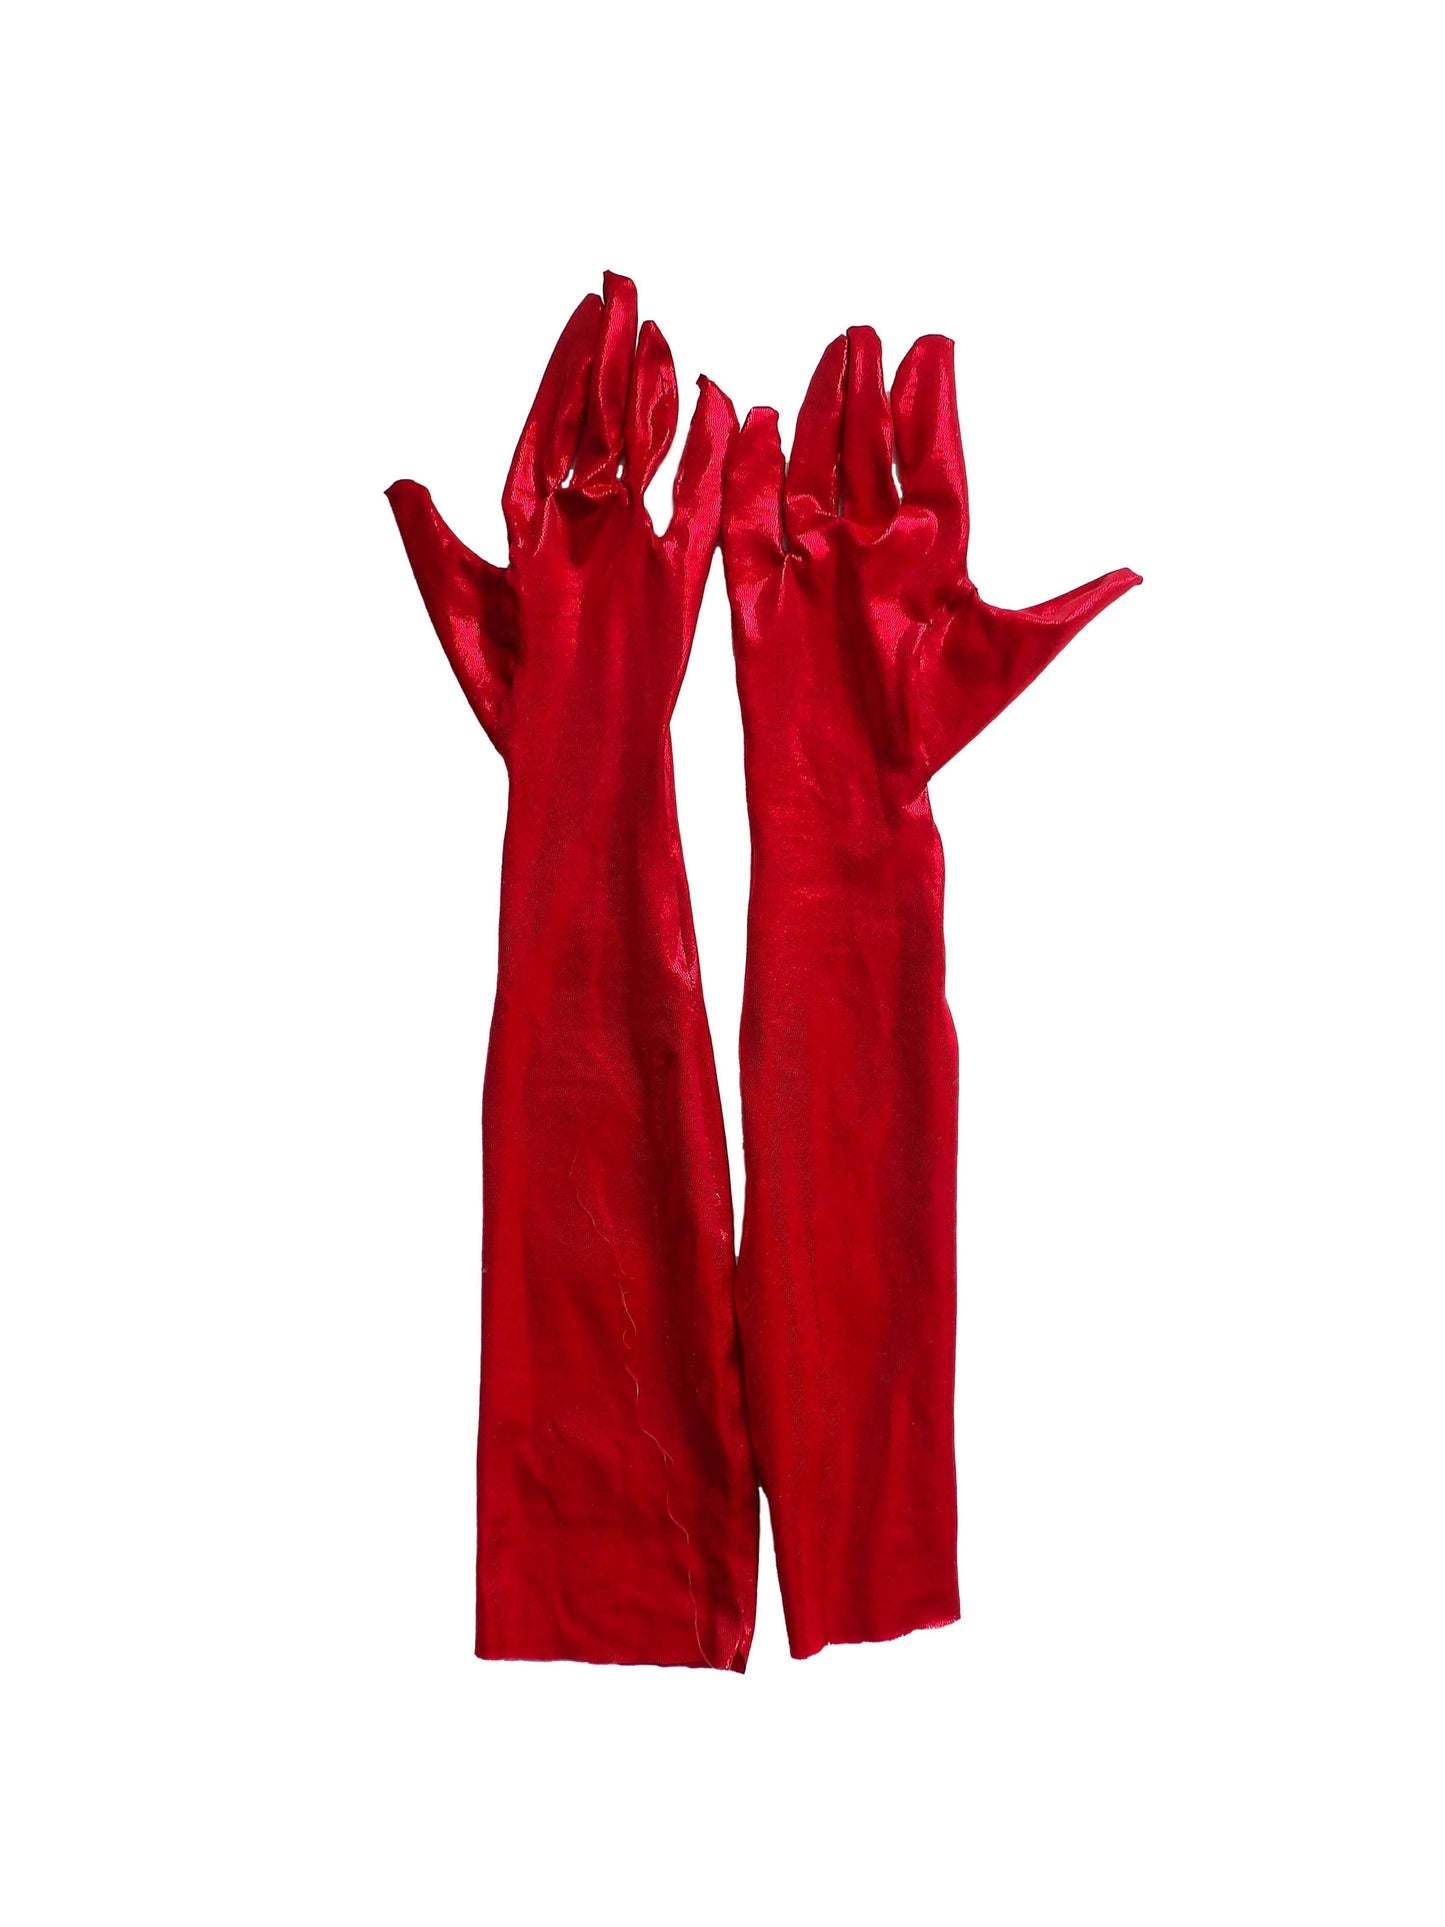 Glossy Red Gloves Performance Gloves